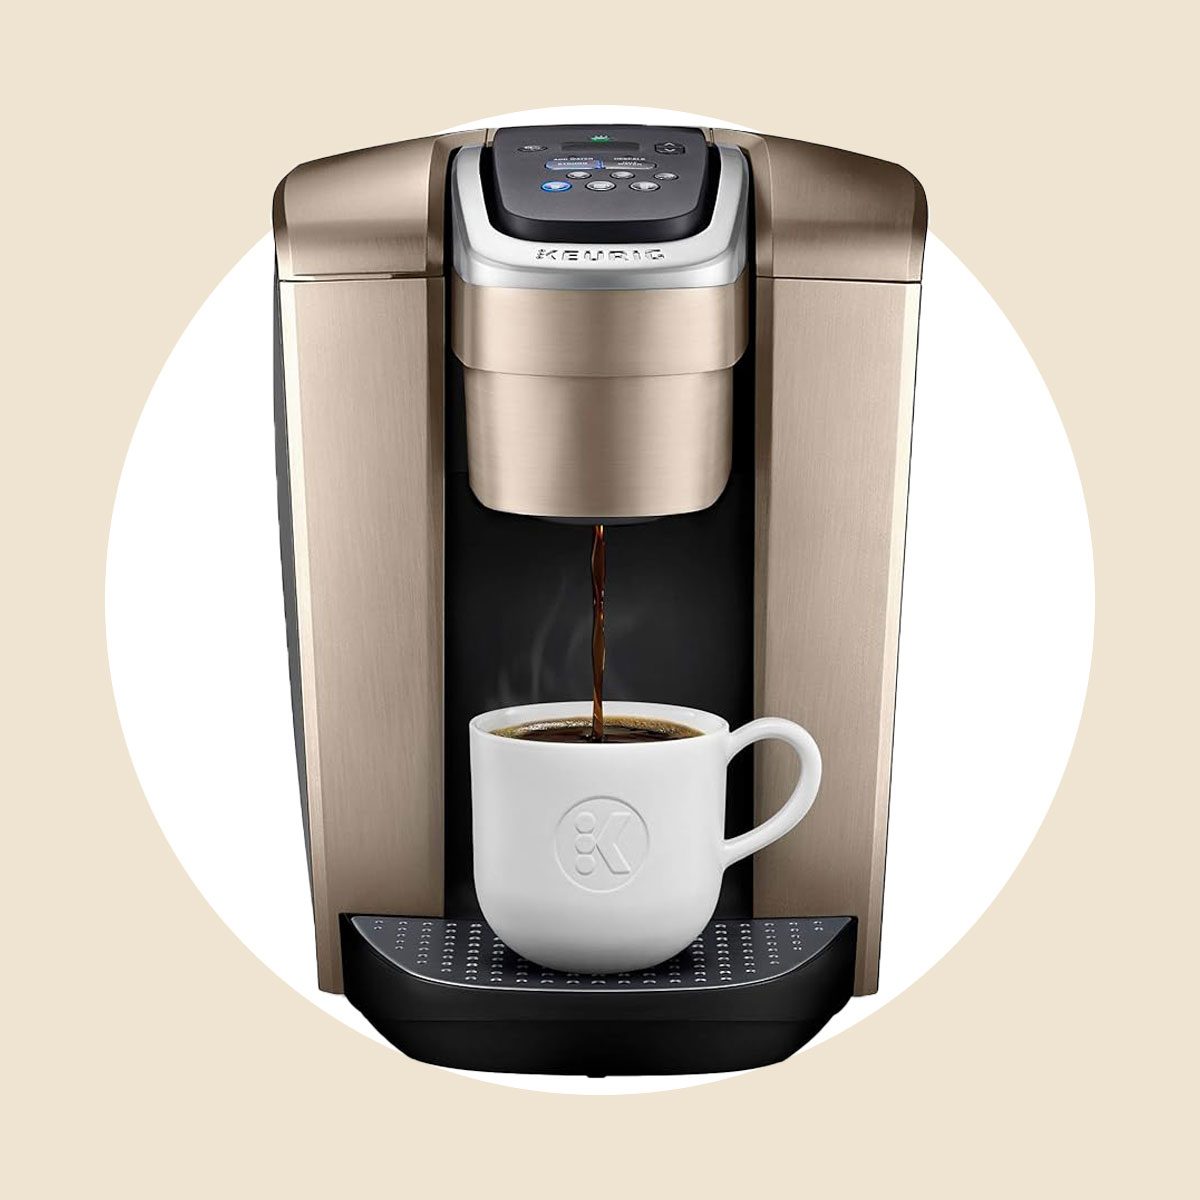 Overall Coffee Maker